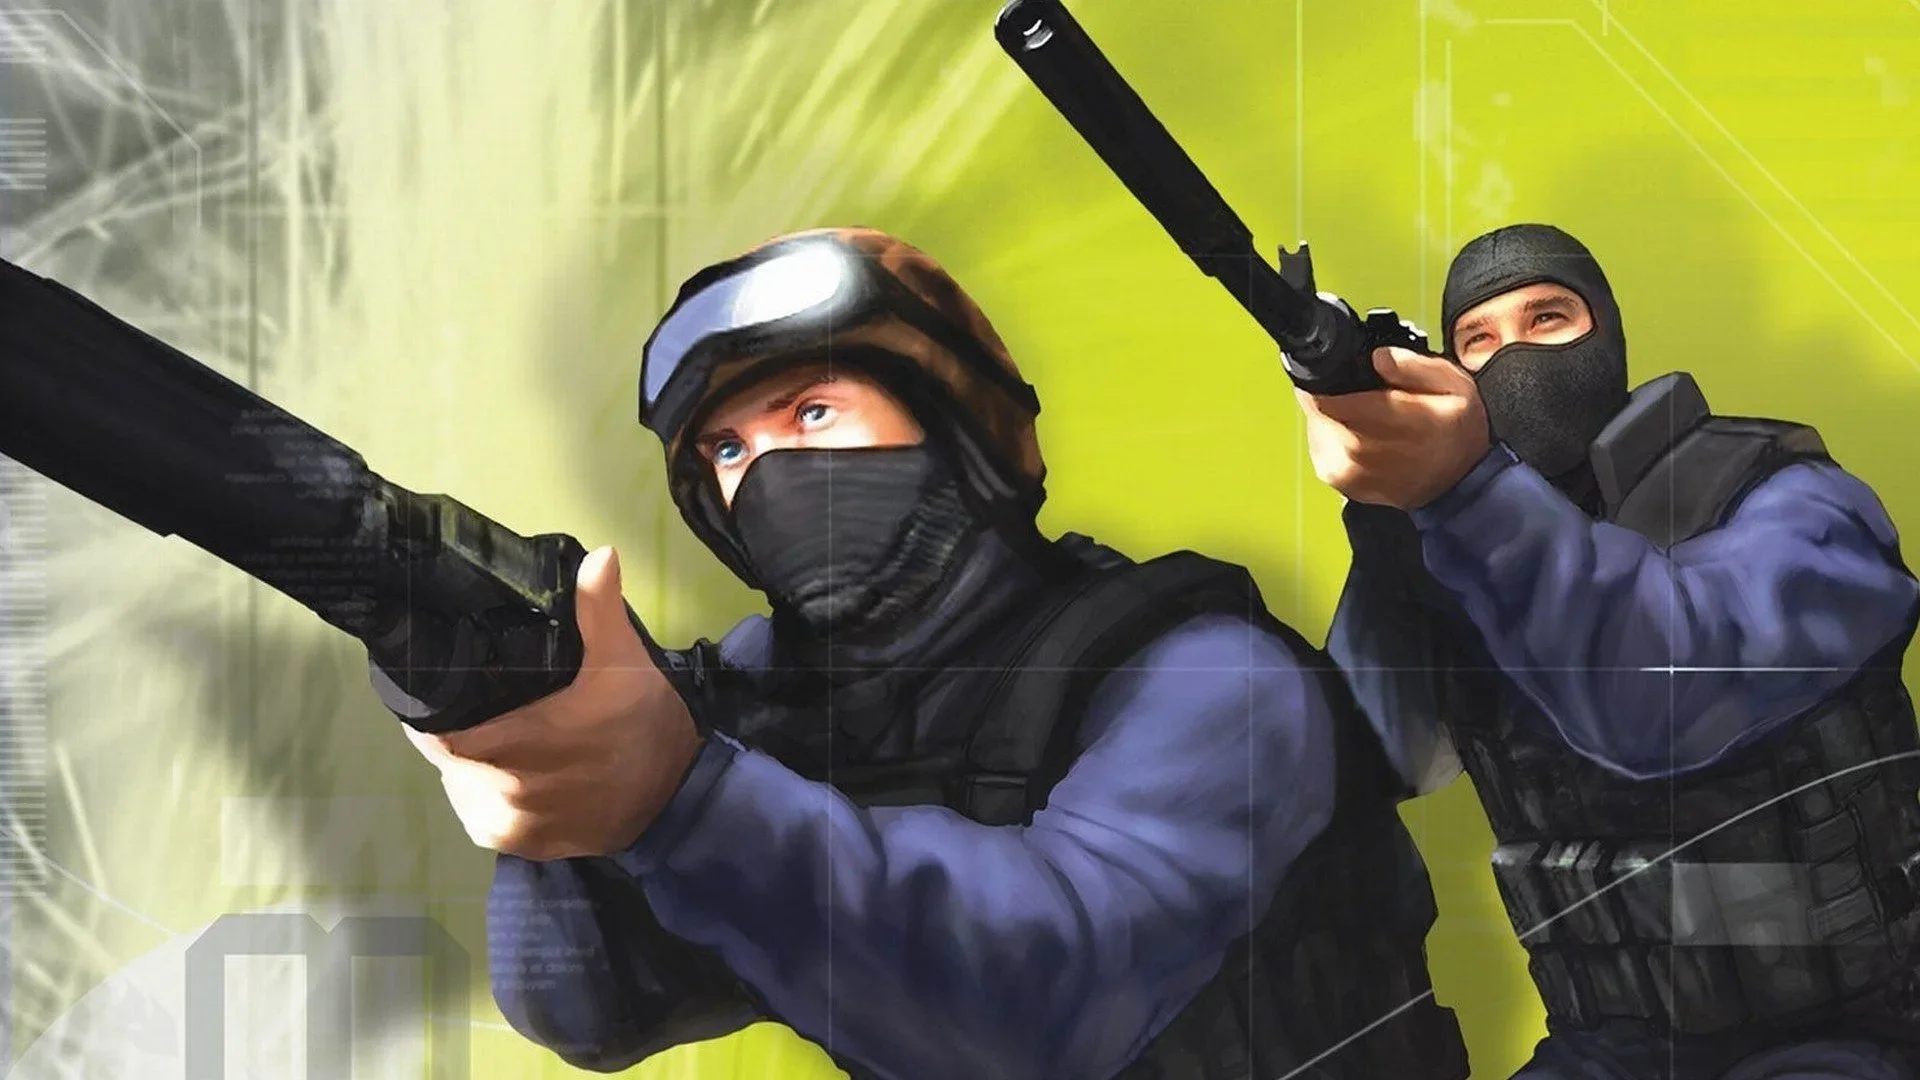 Shooter Counter-Strike: Condition Zero received an unexpected update